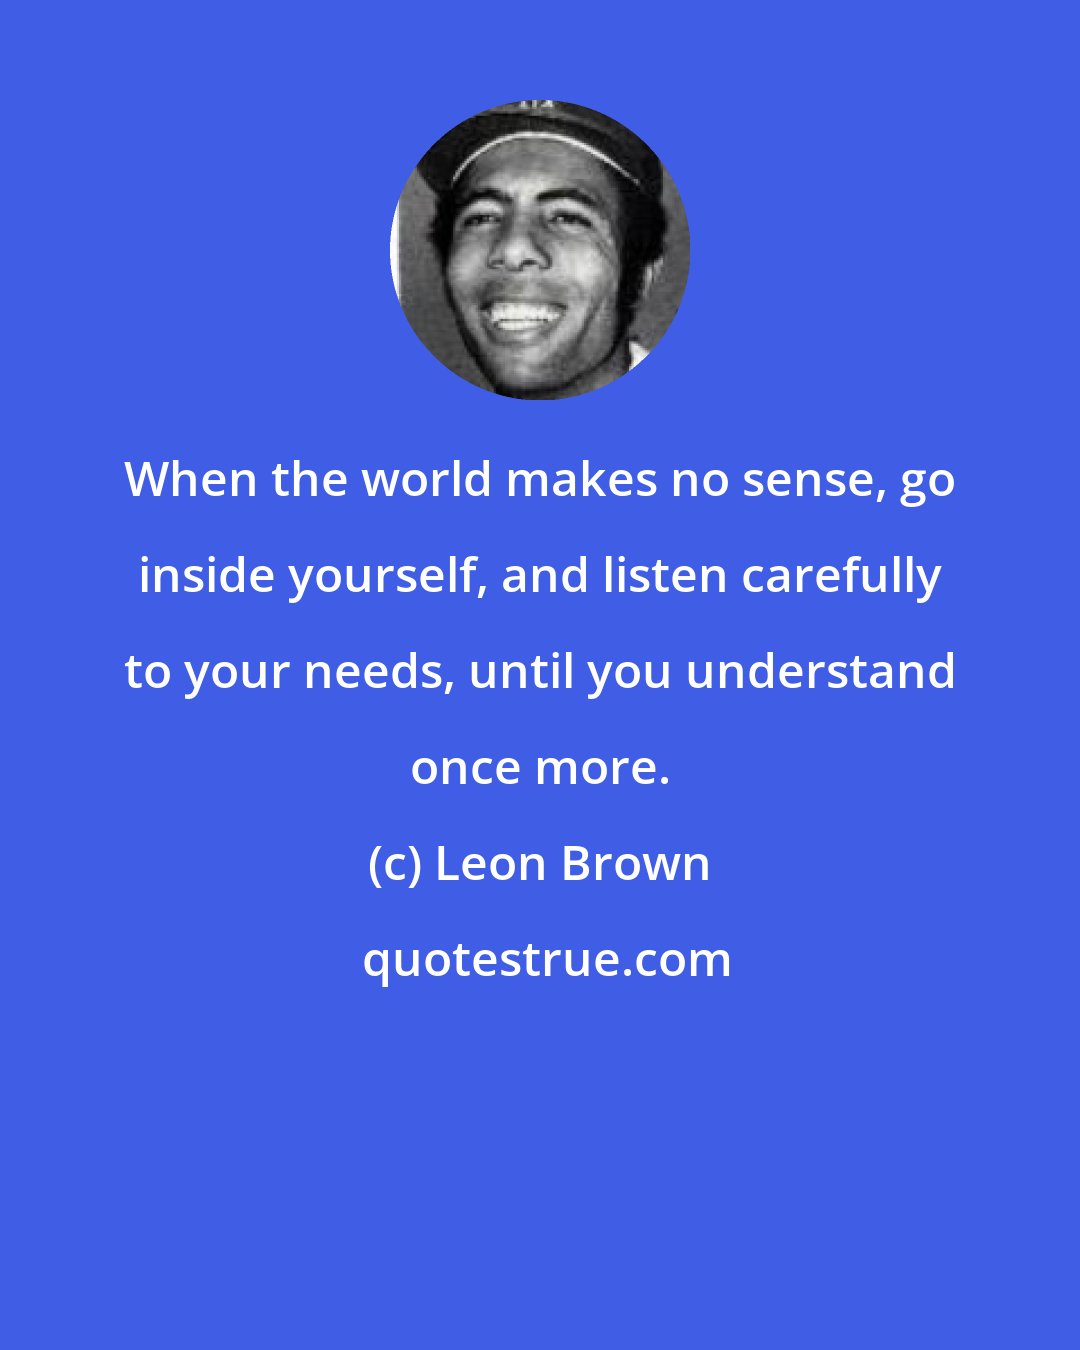 Leon Brown: When the world makes no sense, go inside yourself, and listen carefully to your needs, until you understand once more.